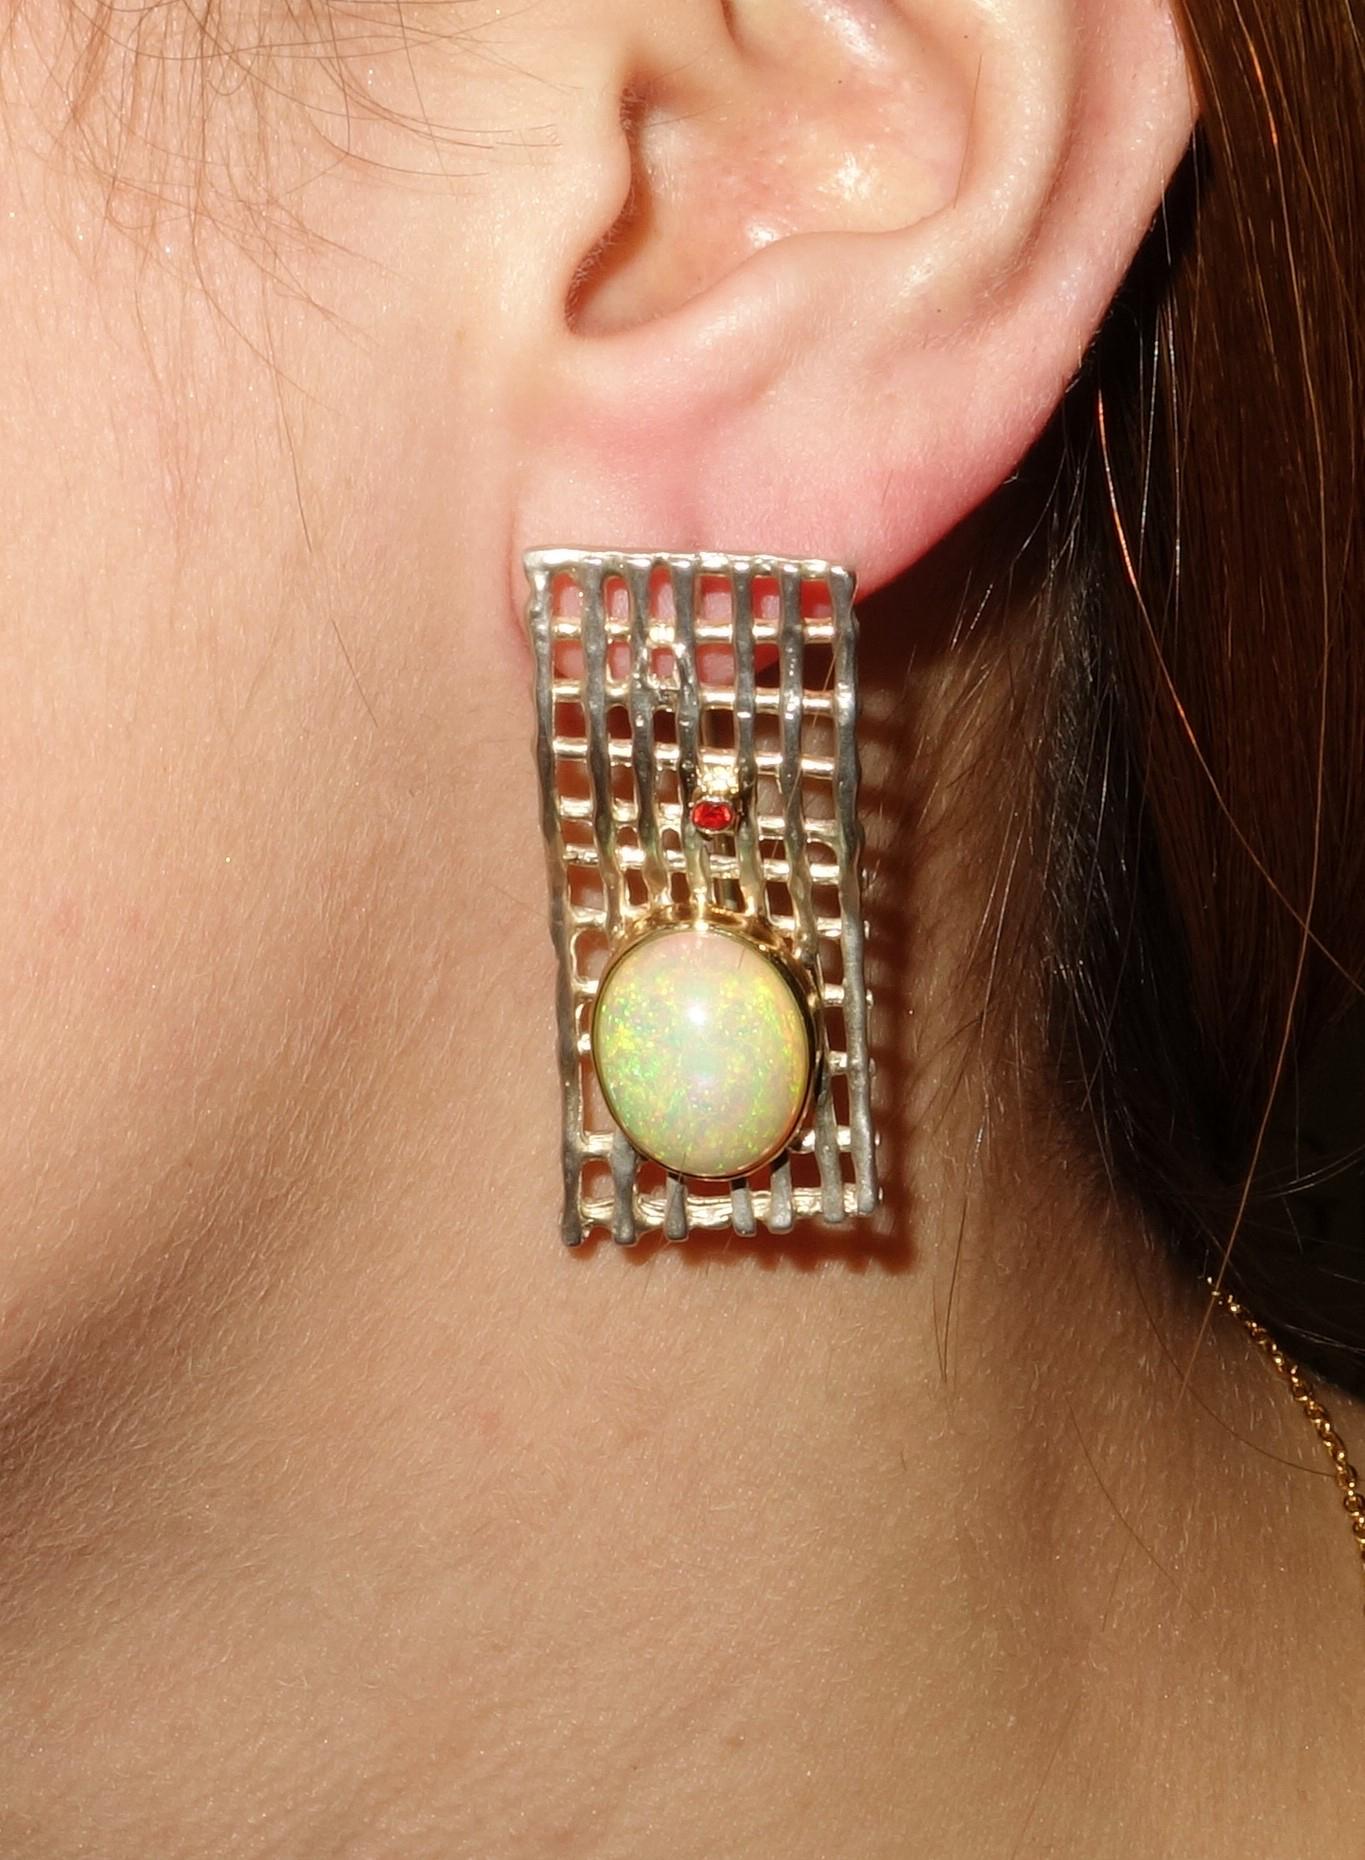 Stylish and finely detailed Ethiopian Opal and Gemstone Sapphire Earrings in flattering Lattice design rectangular form. Hand crafted in Rhodium Tarnish resistant Sterling Silver with Gold accents; each earring is set with an Oval Ethiopian Opal,